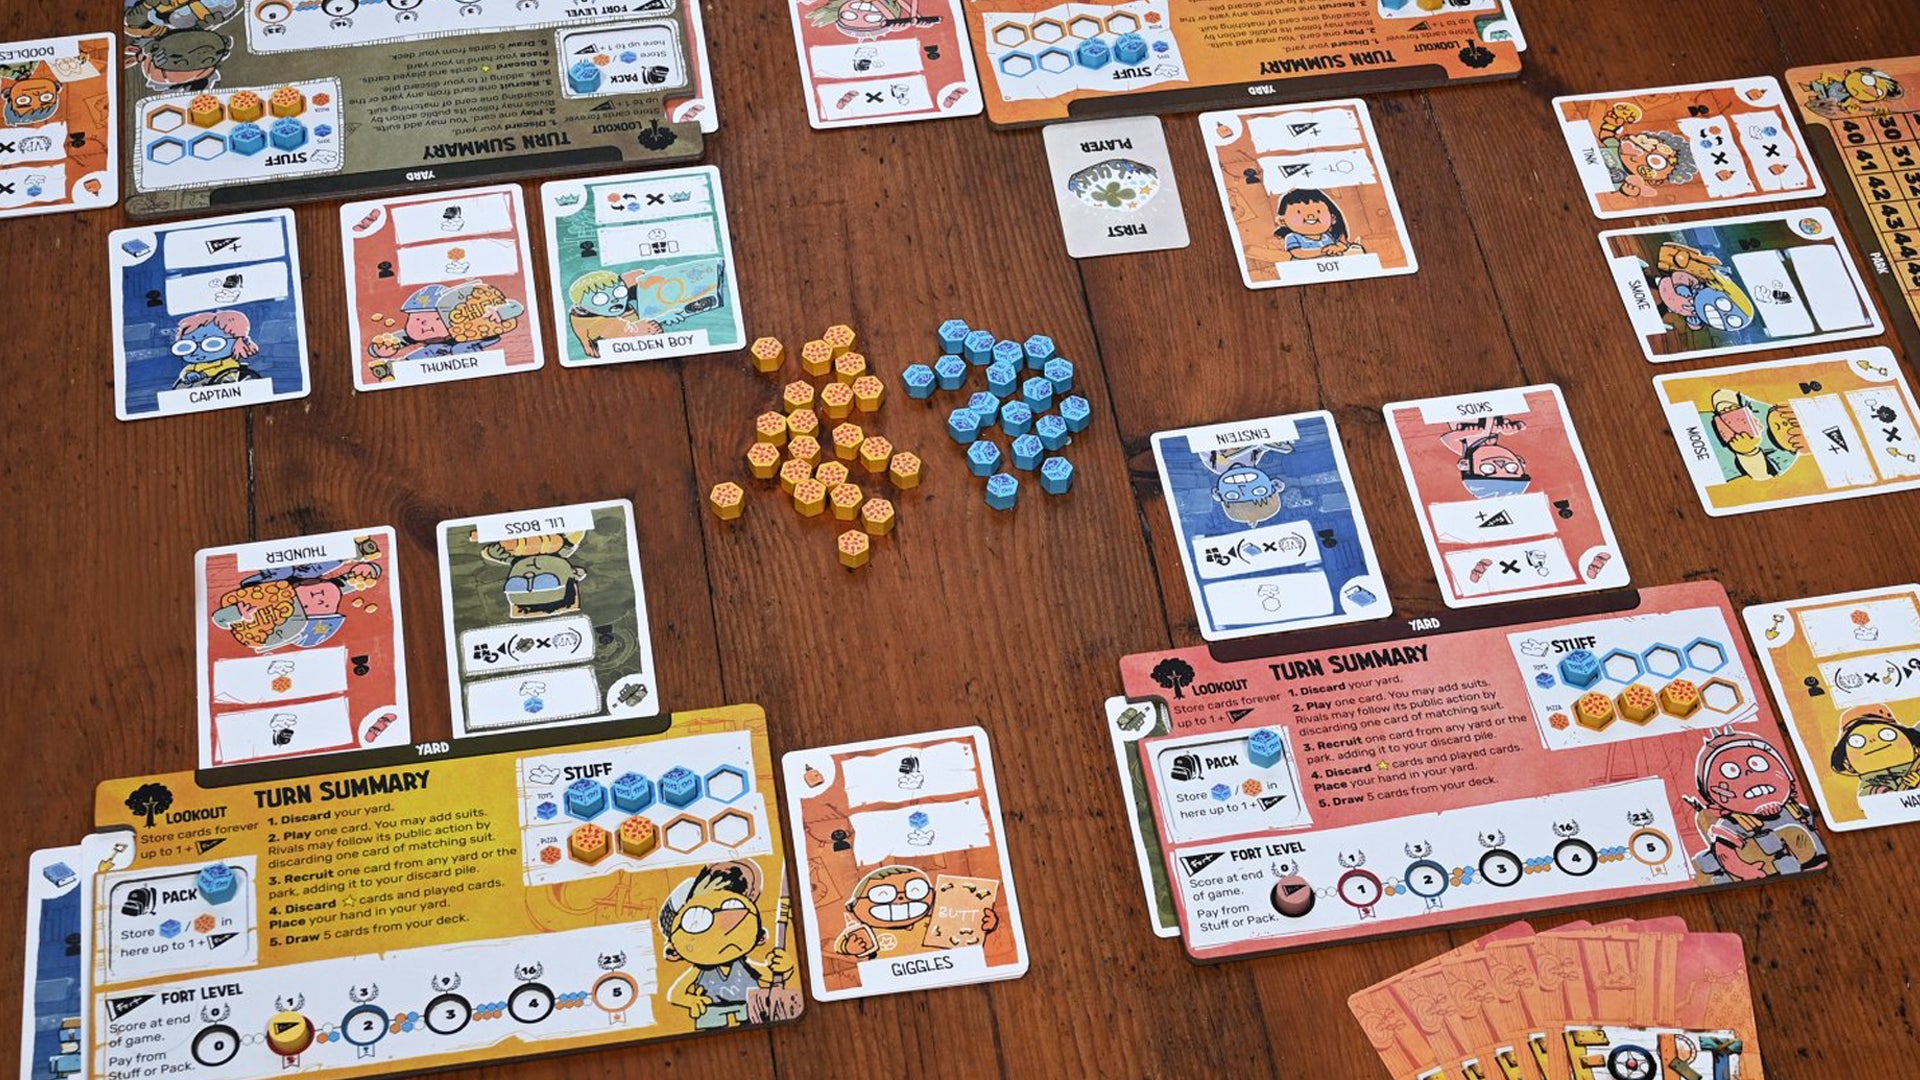 Fort board game review - childhood whimsy meets captivating cardplay in ...